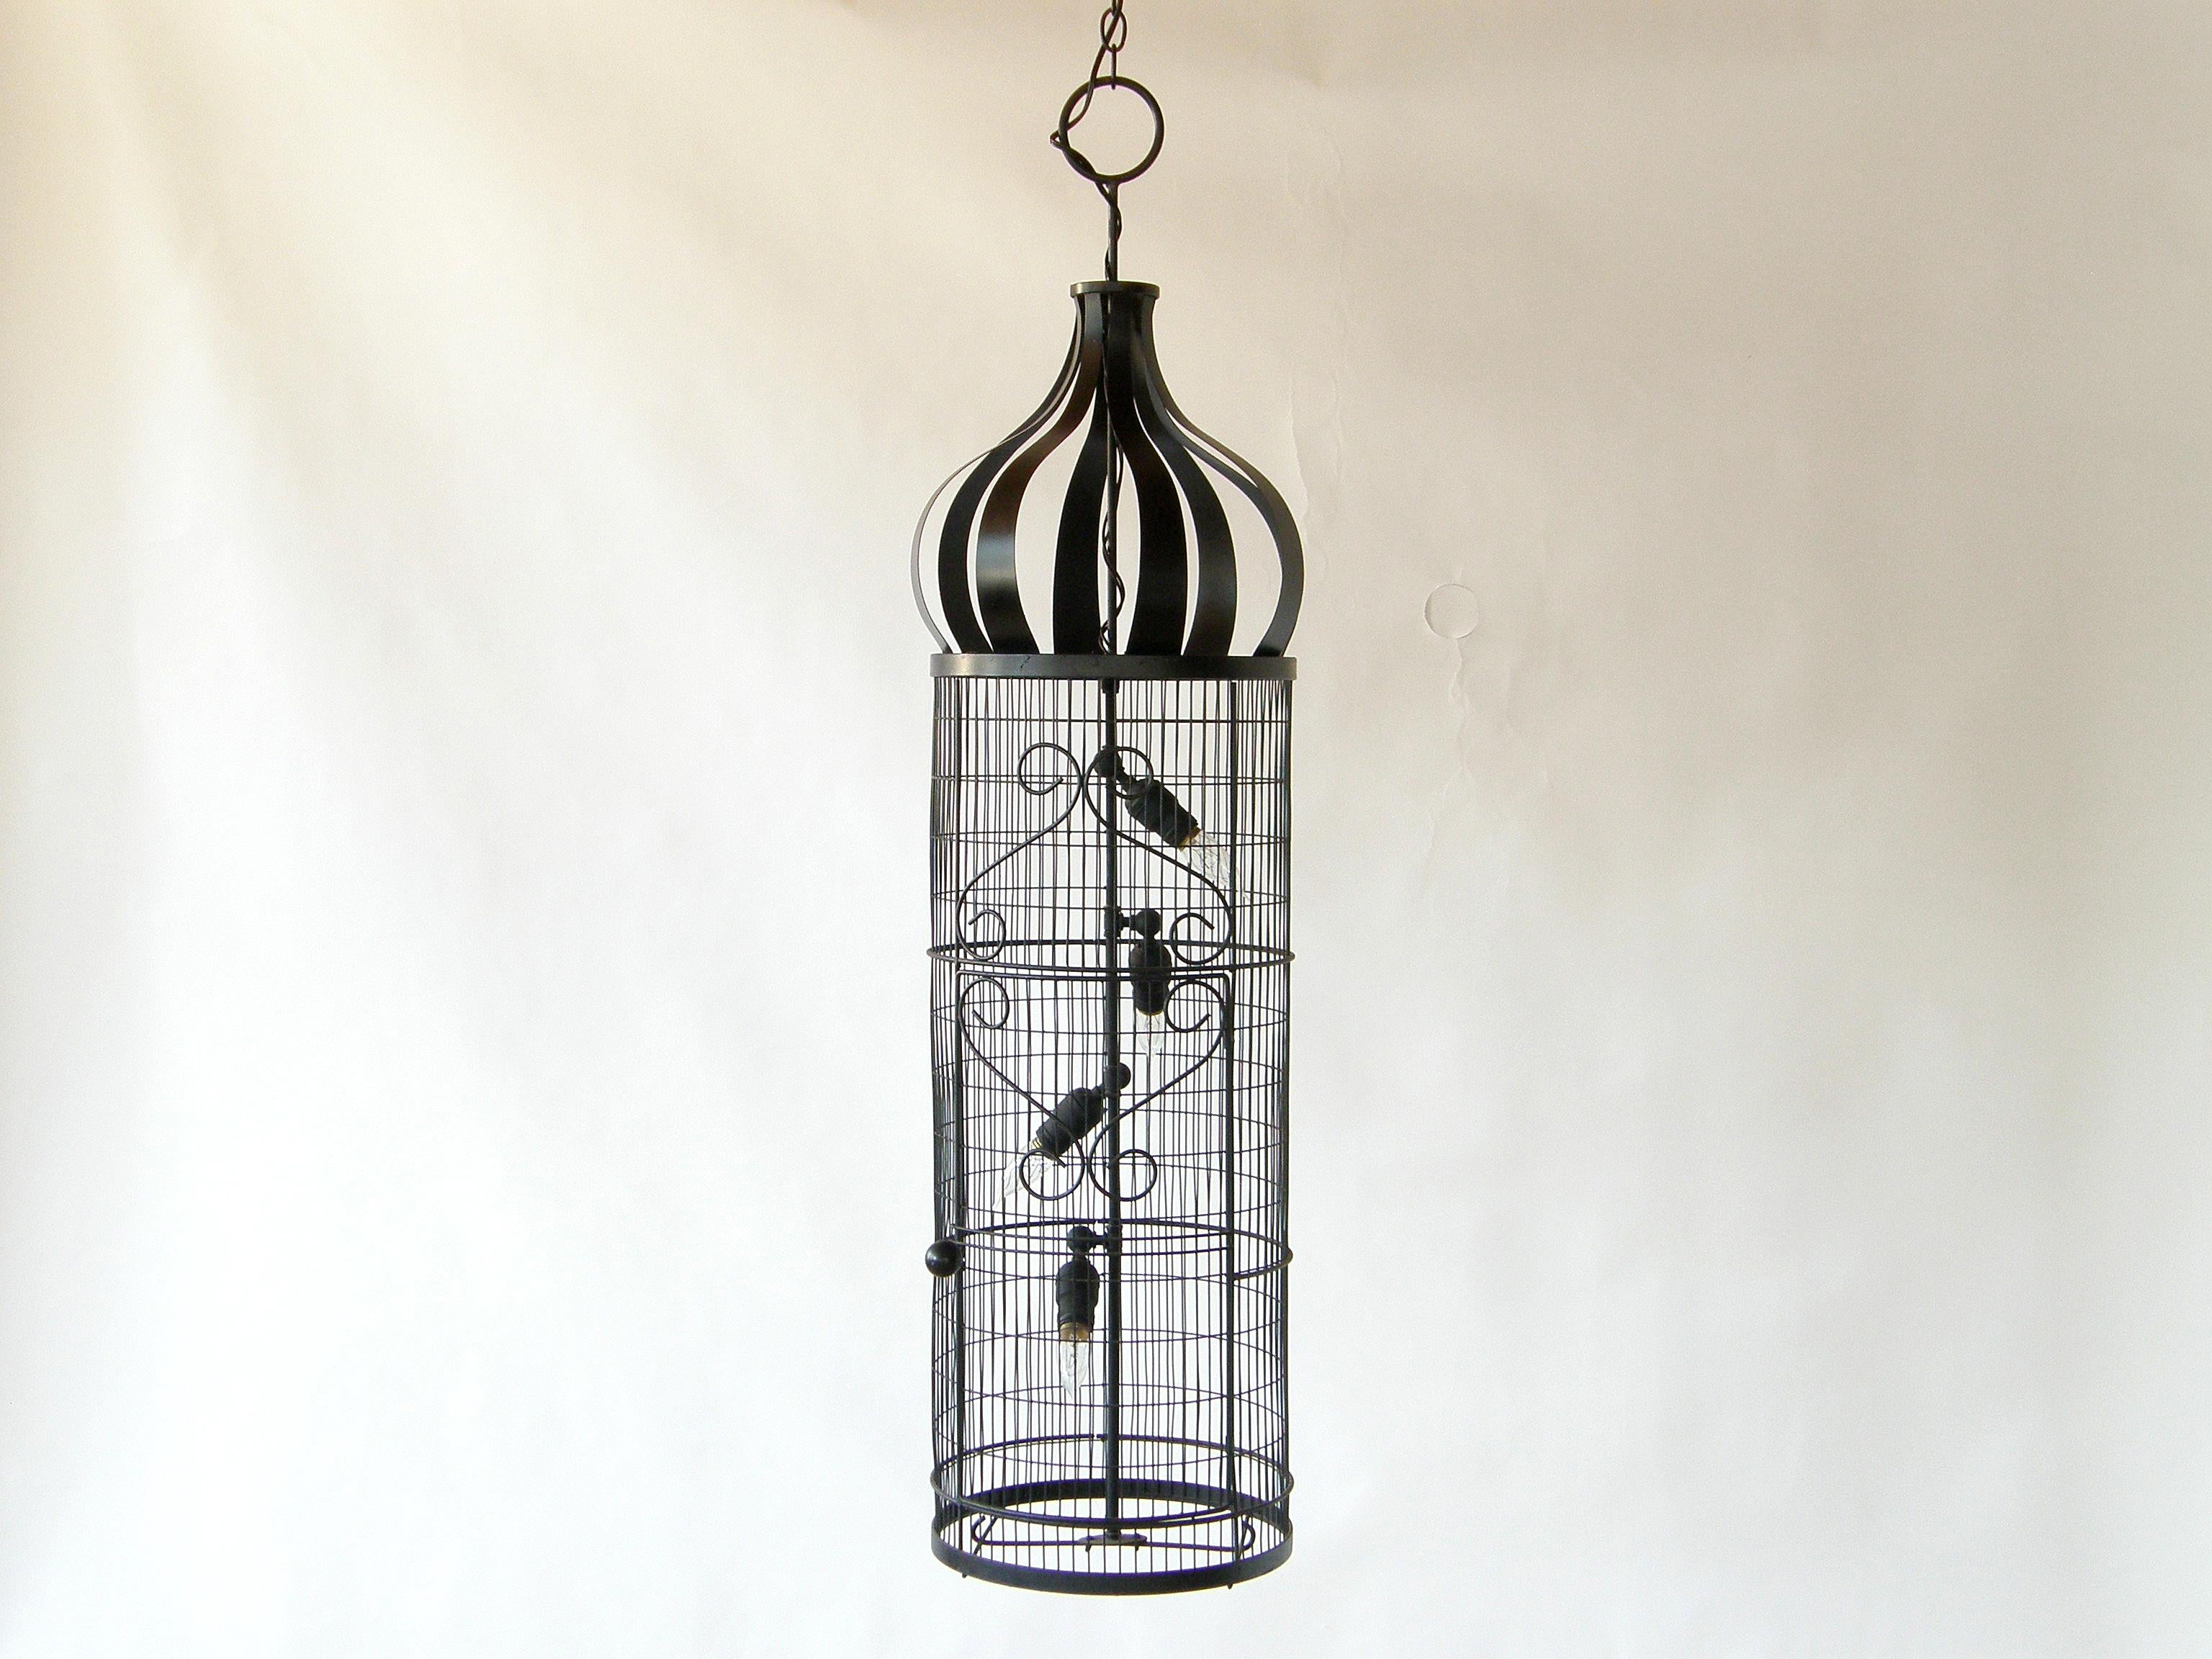 This bird cage shaped hanging fixture was originally designed by Frederic Weinberg as a planter. A slight variation of this design was also available as an actual bird cage, but I can find no reference to it having been offered by Frederic Weinberg